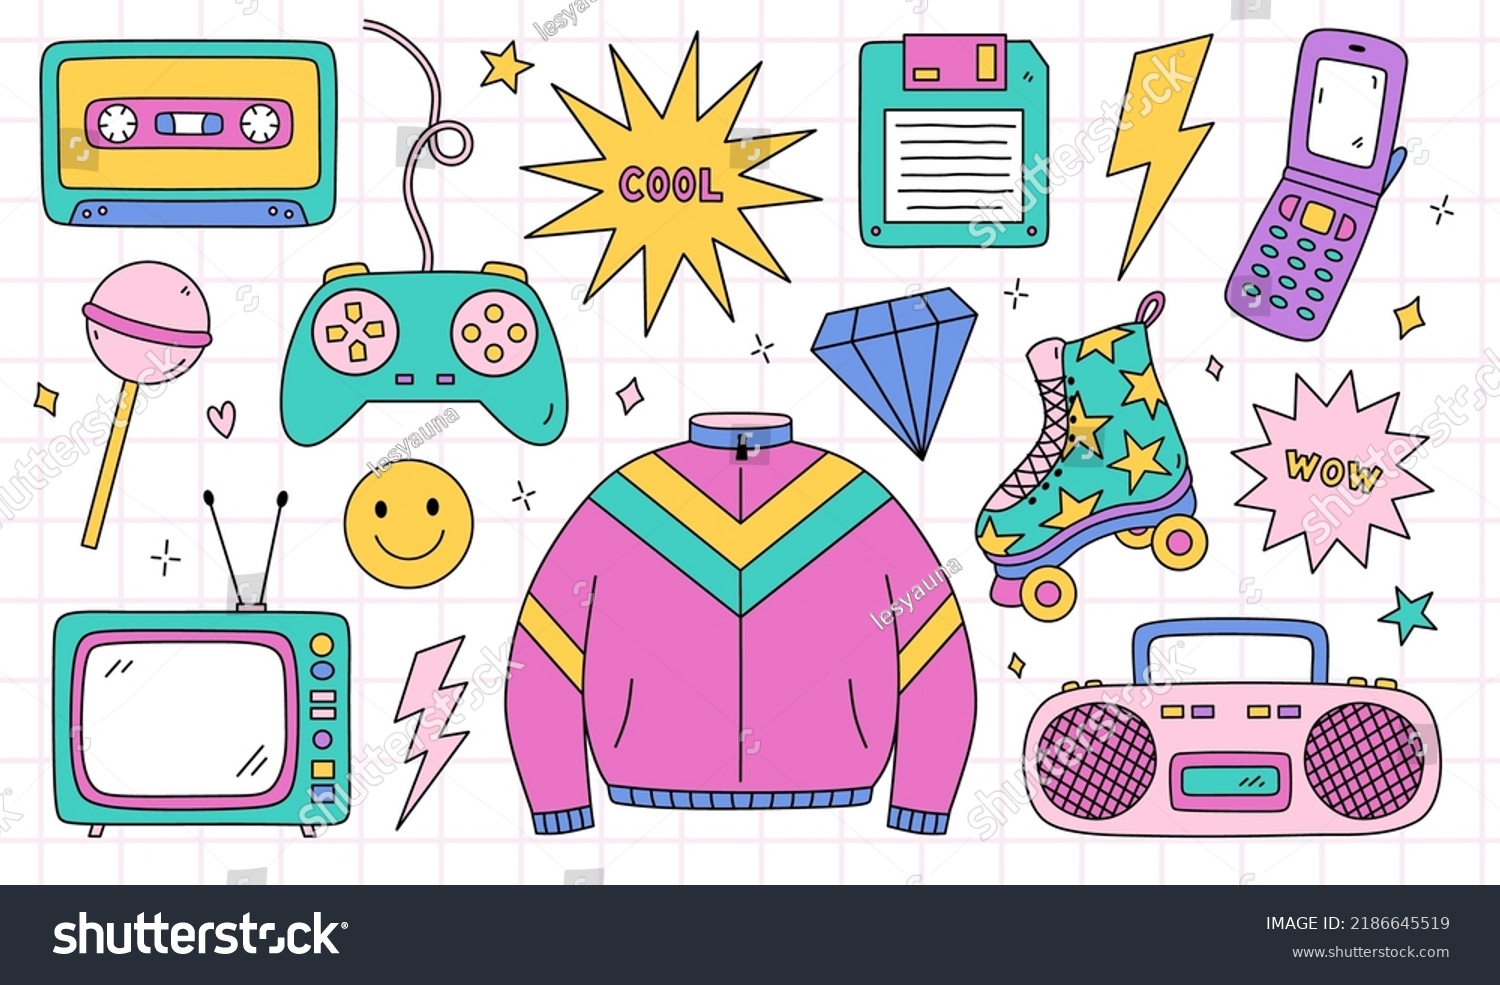 SVG of Bright doodle set of items from the nineties - retro cassette tape, sports jacket, tape recorder, roller skate, TV, joystick, floppy disk, cool and wow stickers, lightnings. Nostalgia for the 1990s. svg